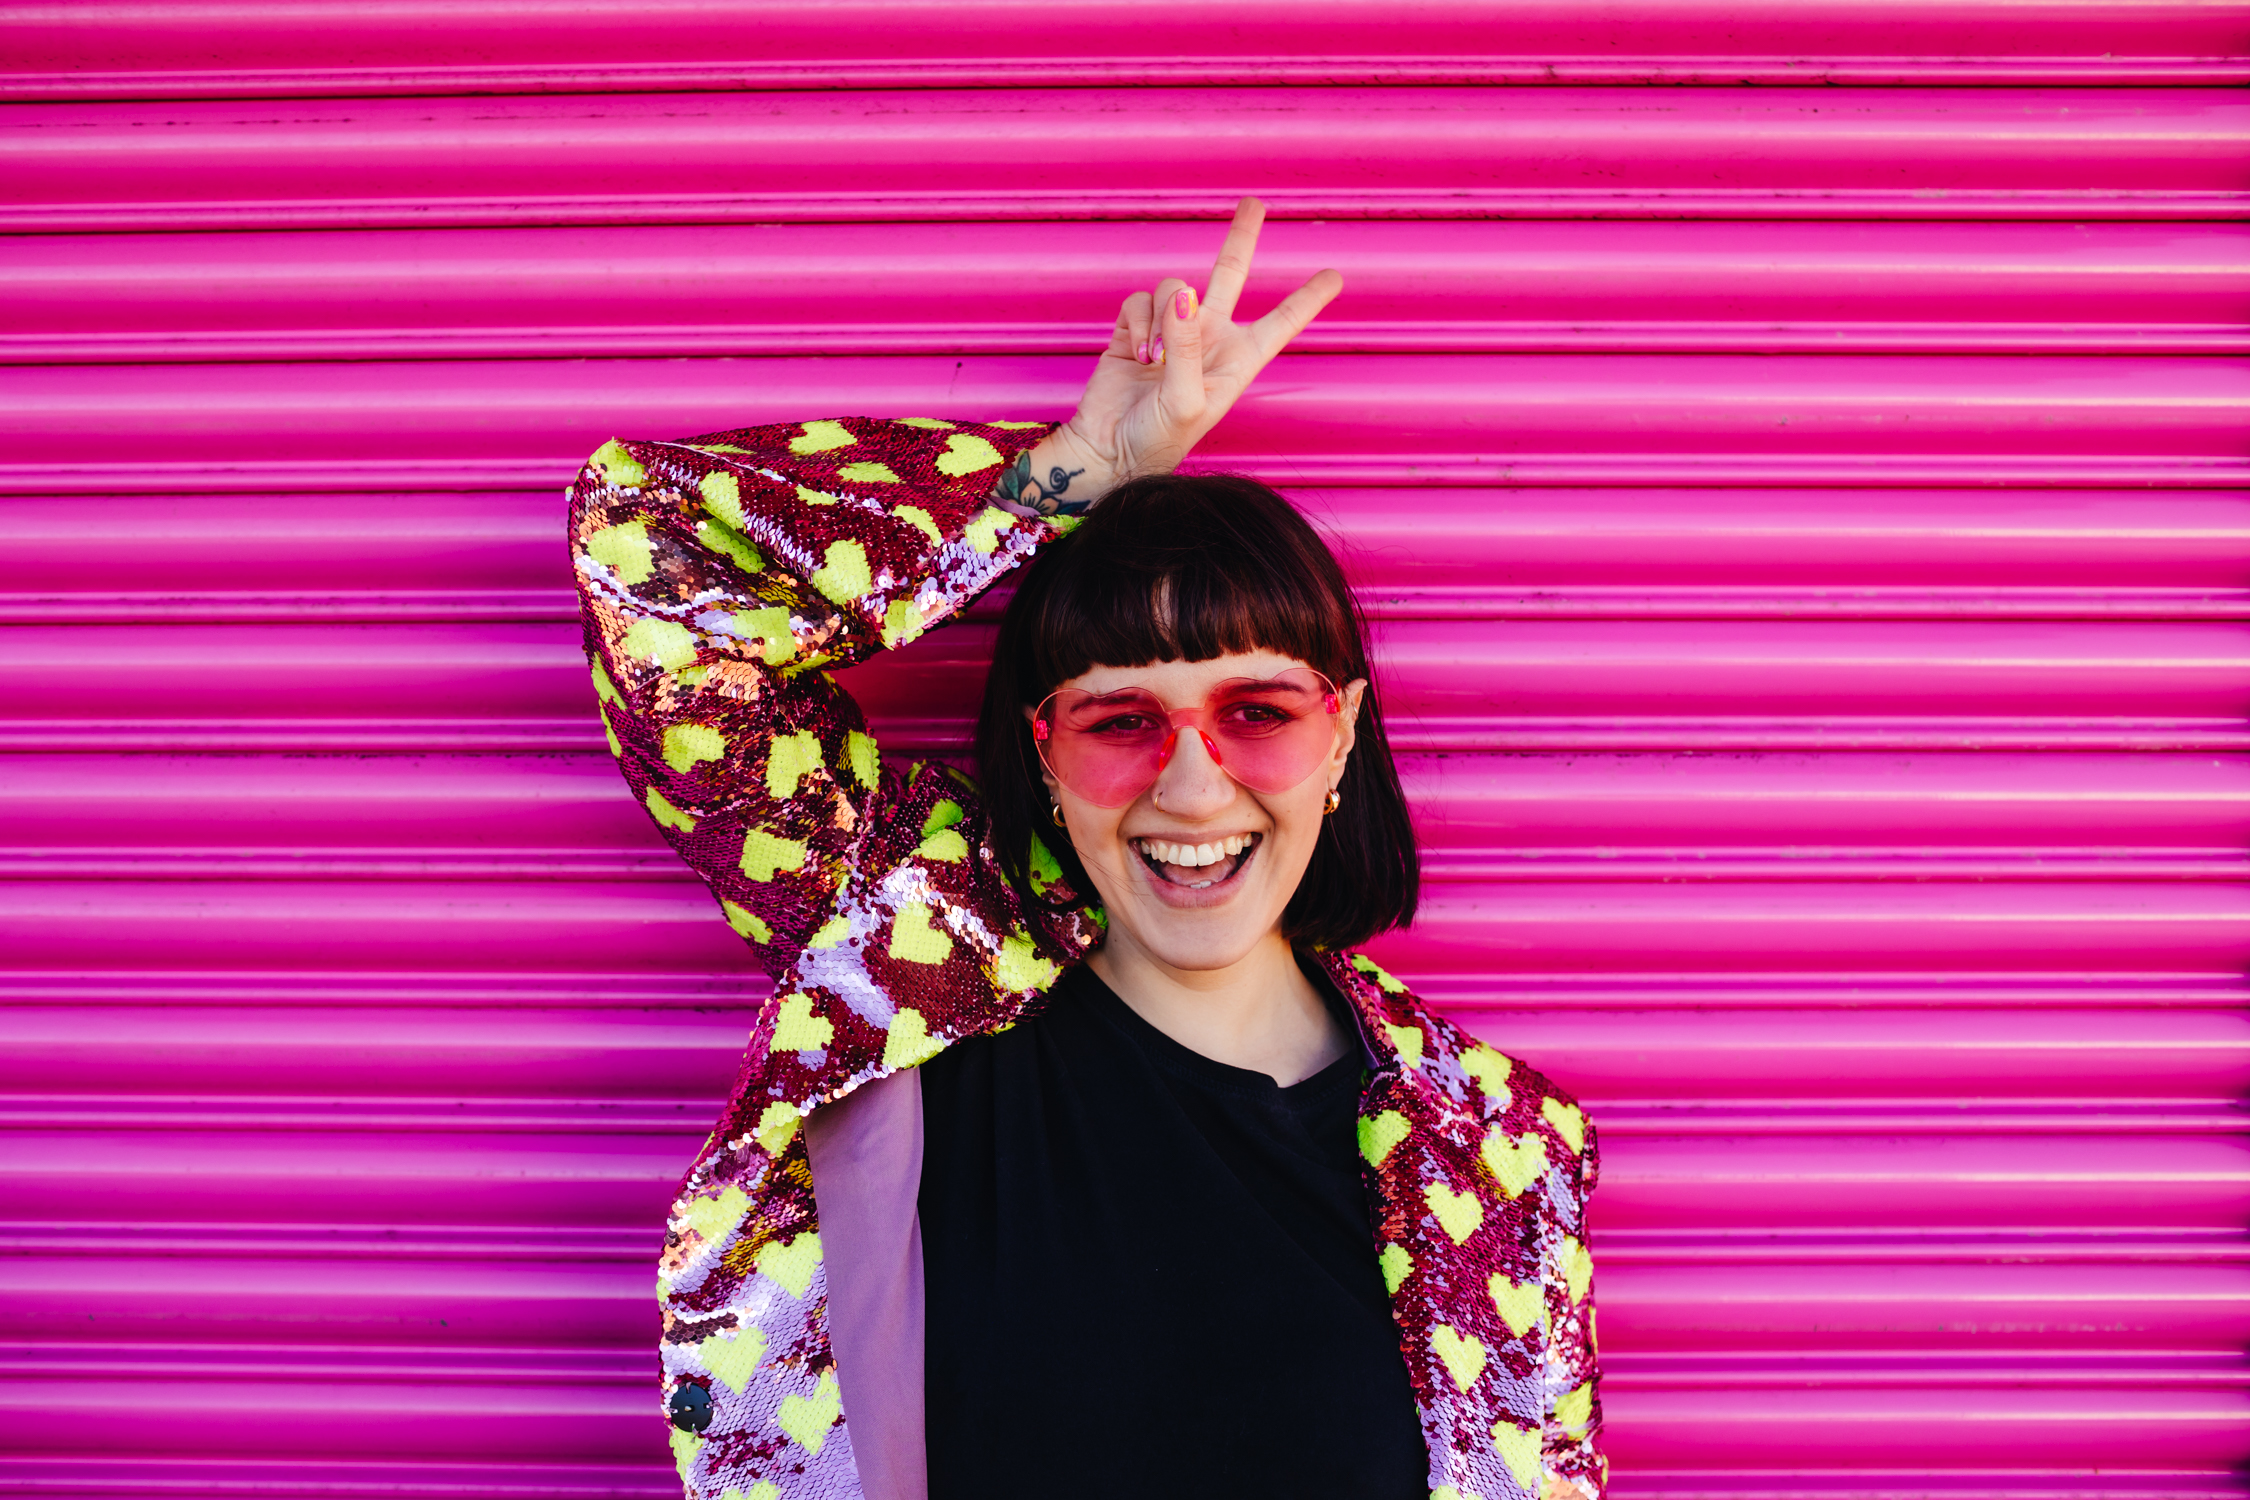 White woman with a funky haircut, pink heart shaped sunglasses and a sequin jacker standing in front of a bright pink shutter, holding her fingers in a peace sign and grinning